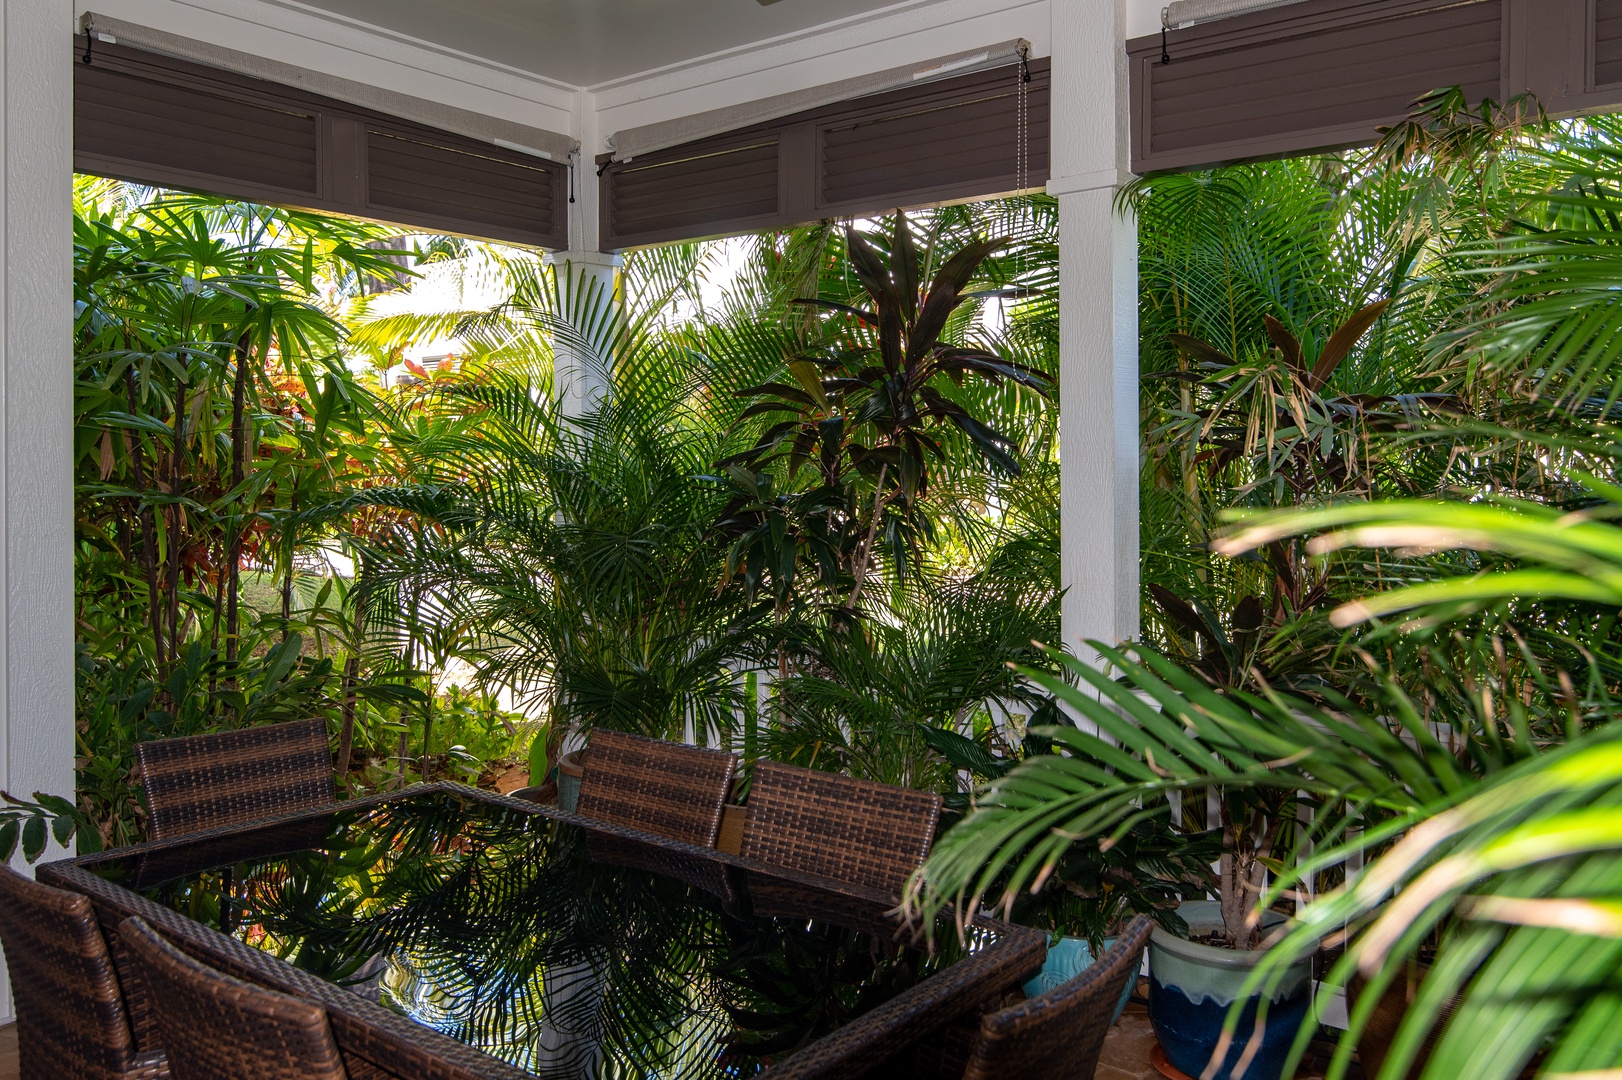 Kapolei Vacation Rentals, Coconut Plantation 1200-4 - The lanai provides a dining space surrounded by tropical plants.